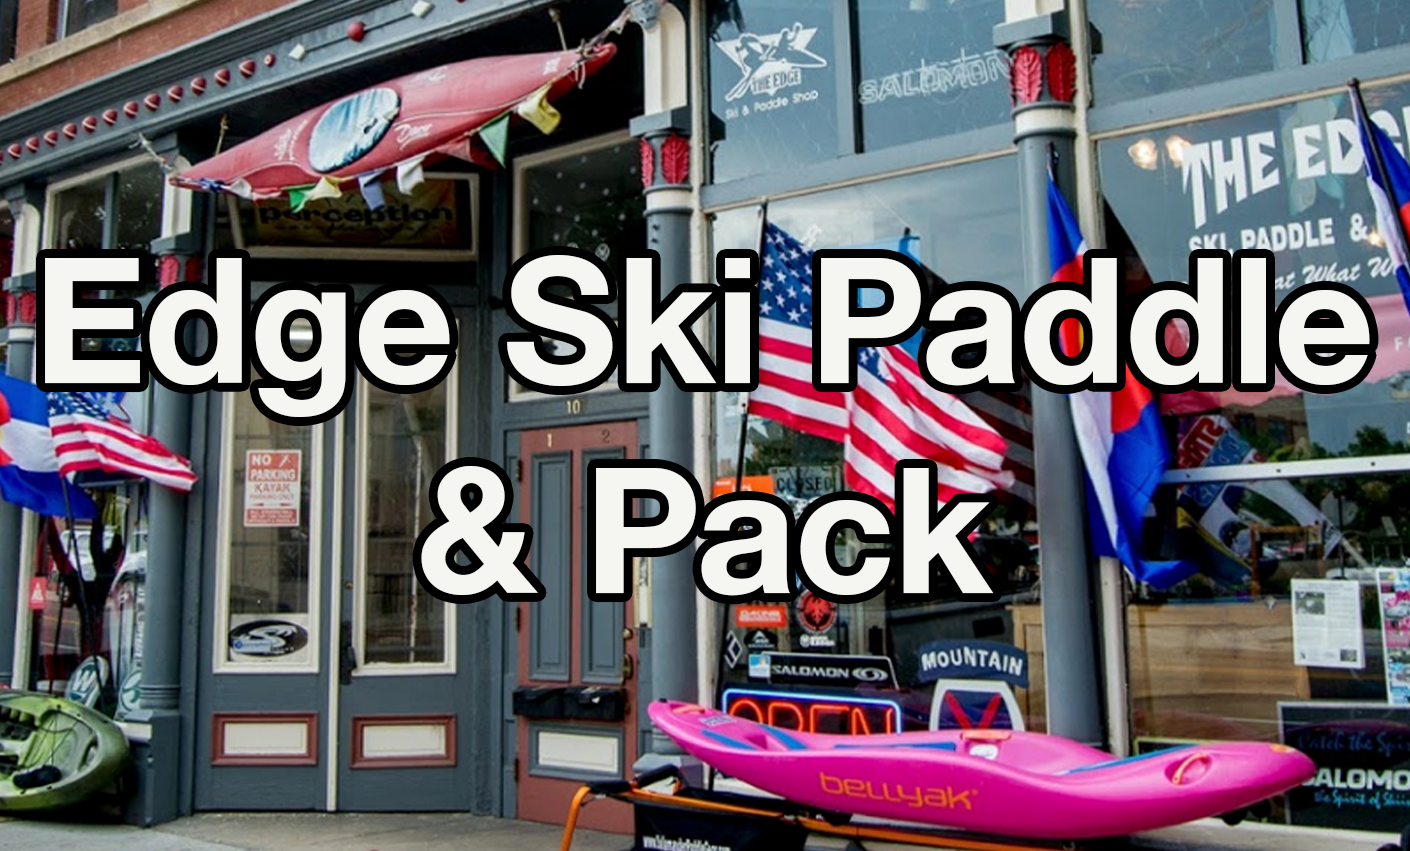 The Edge Ski Paddle and Pack